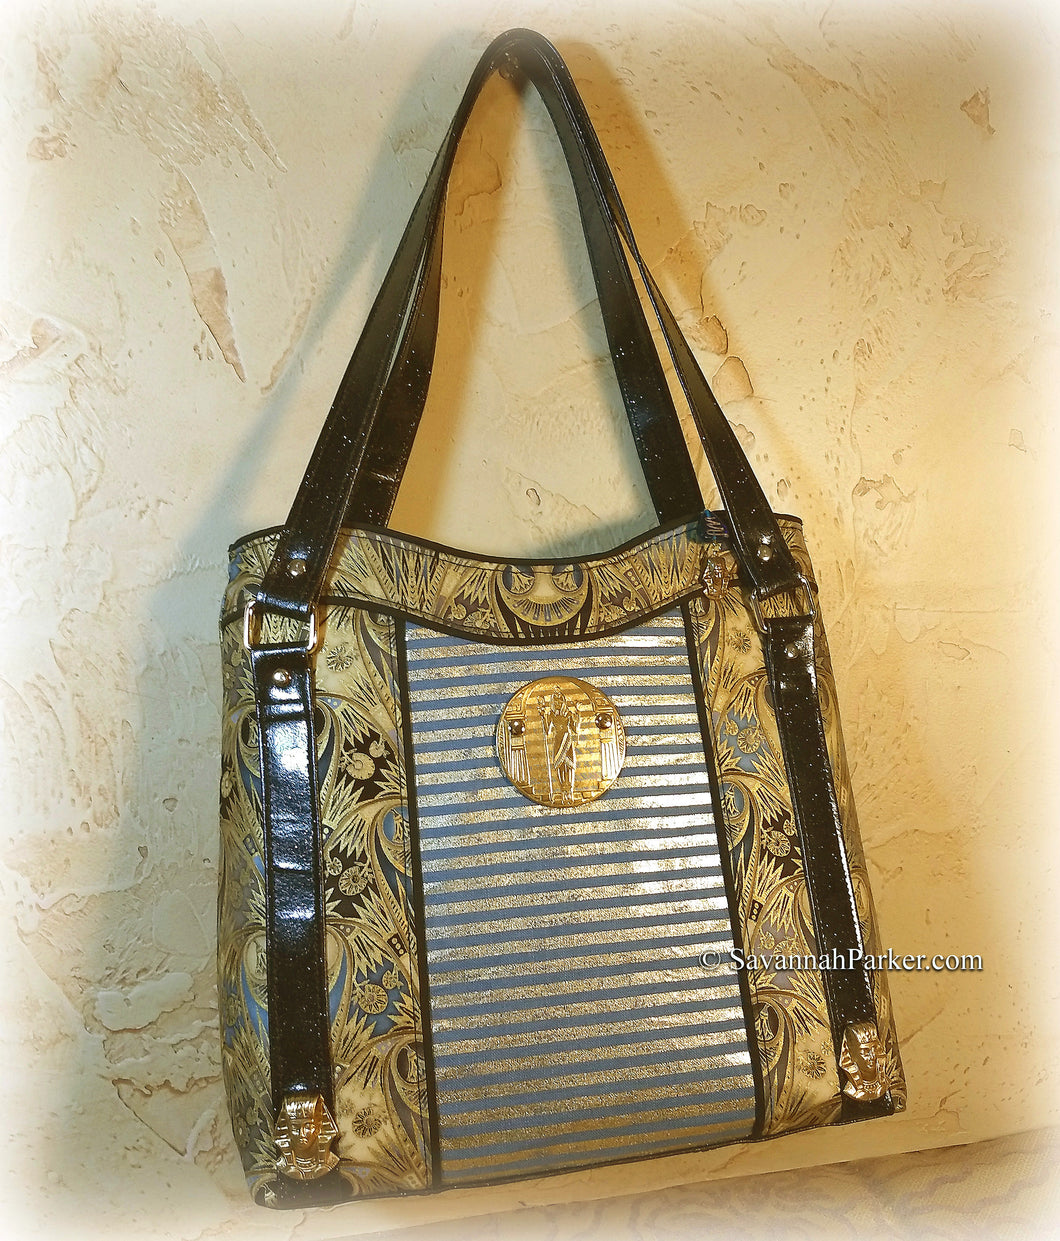 Magnificent Egyptian Inspired Large Handbag -Shoulder Bag -Tote Style -Rare Metallic Egyptian Print -Vintage Brass Accents -Double Handles